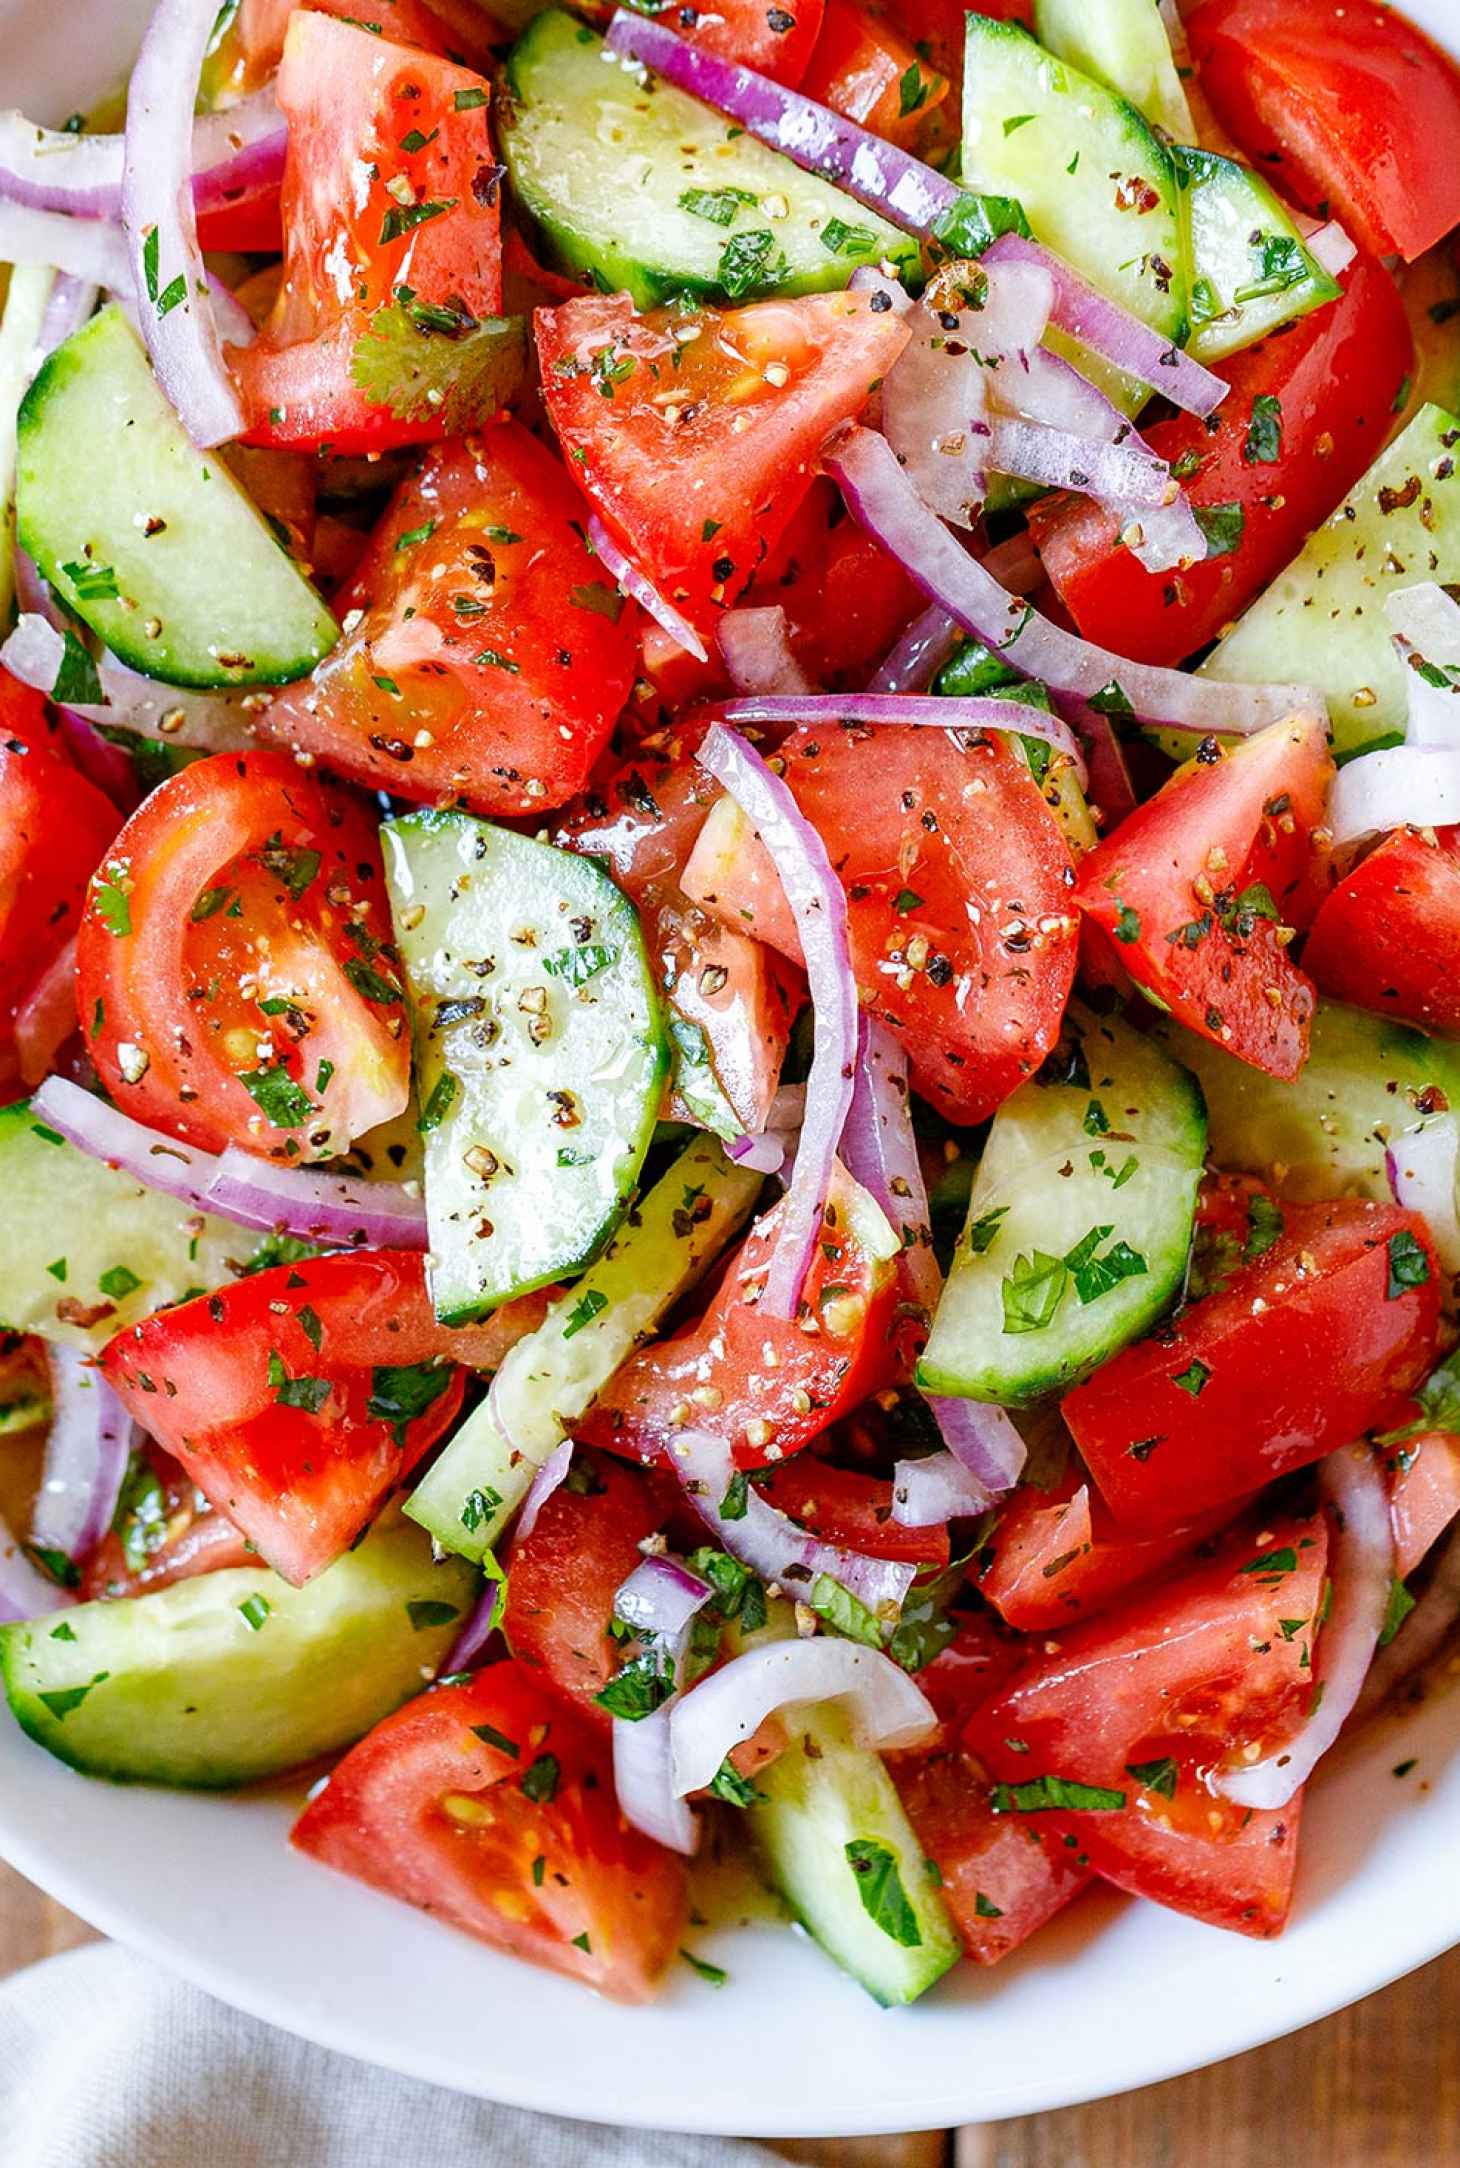 Easy Tomato Cucumber Salad - #recipe by #eatwell101 - https://www.eatwell101.com/tomato-cucumber-salad-recipe